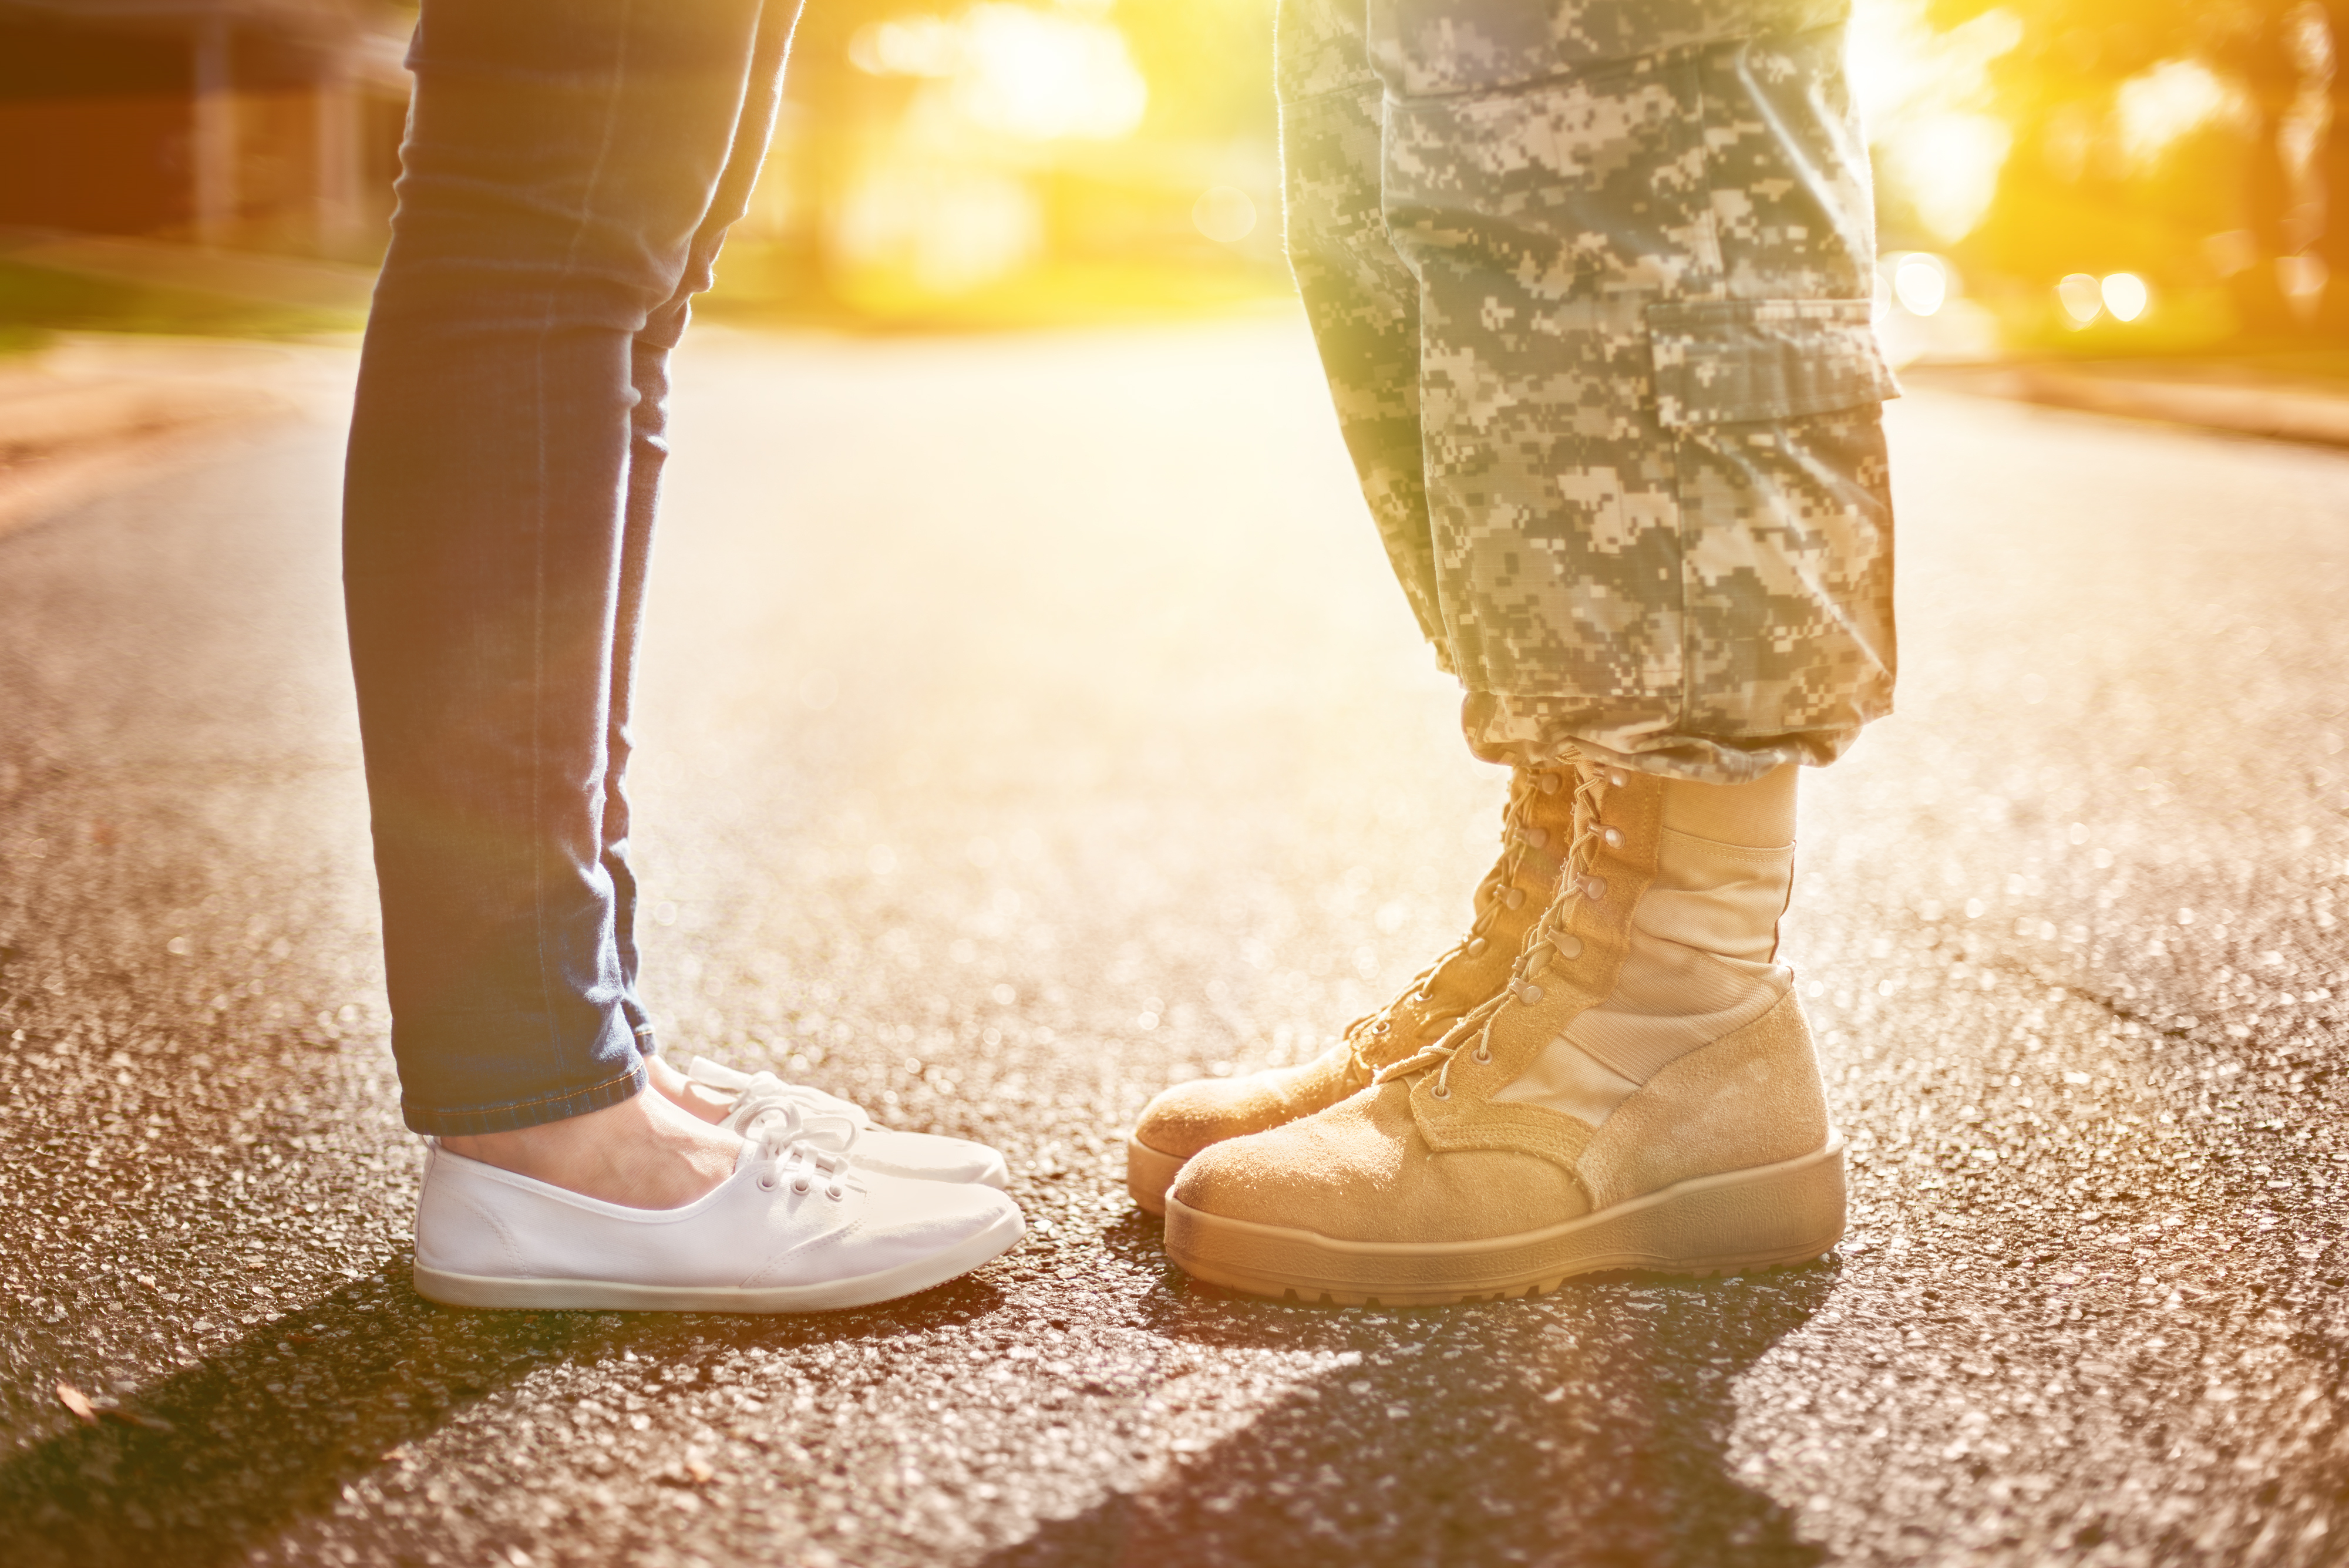 Young military couple kissing each other. | Source: Shutterstock